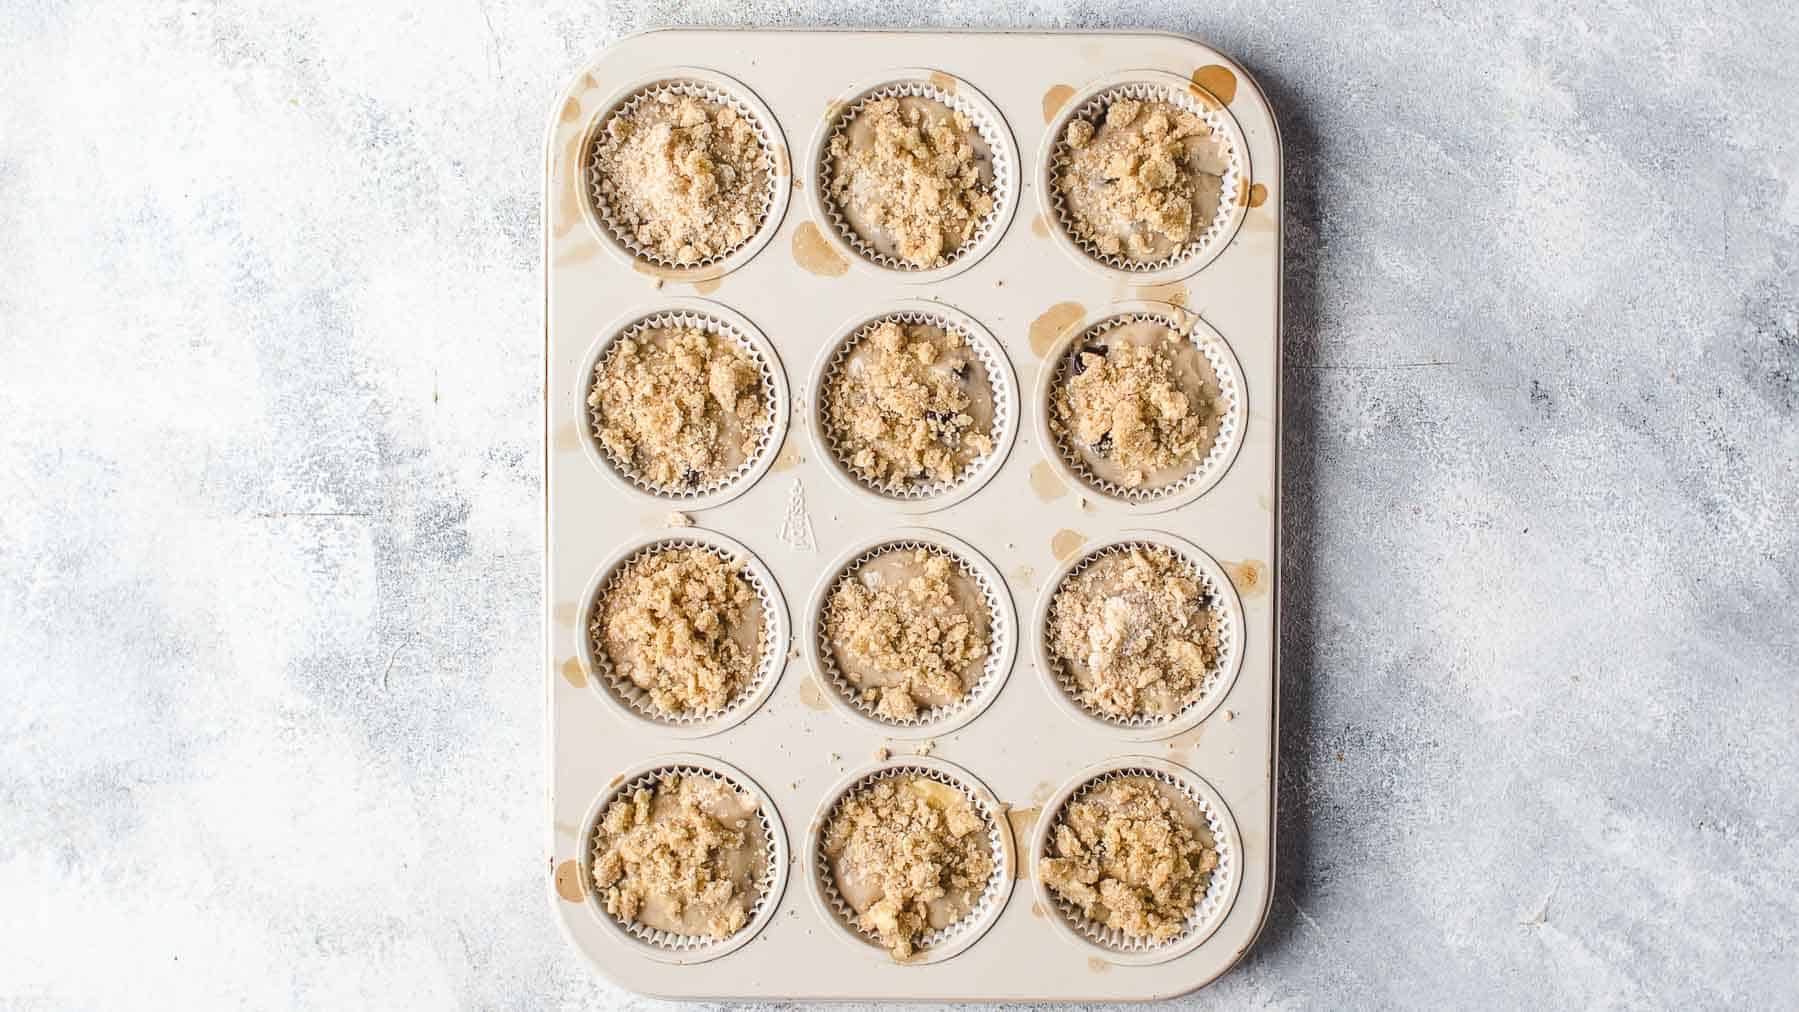 Banana Chocolate Chip Muffins Batter in a muffin pan with streusel on top